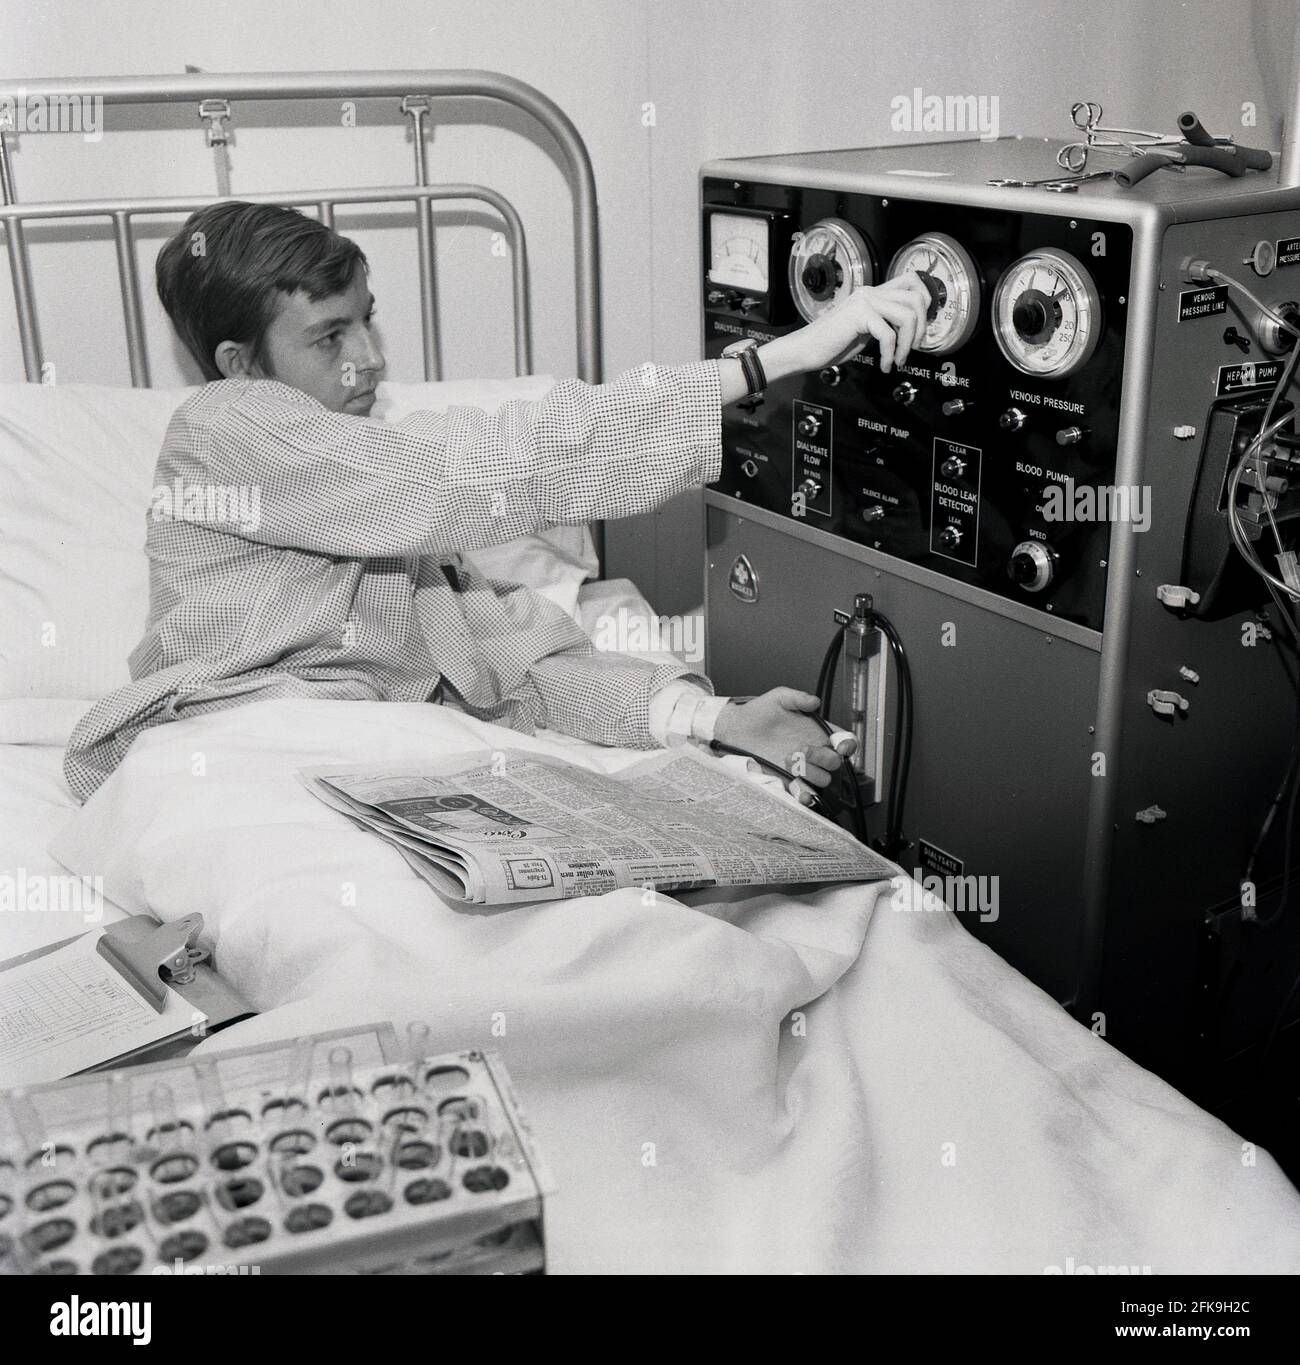 1960s, historical, a young man lying in a hospital bed adjusting a dial on a large machine he is attached to, a dialaysis machine that helps pump blood into the kidneys, South East London, England, UK. Dialysis is a medical treatment that filters and cleans the blood using a machine, which helps to keep the body in balance when the kidneys can't perform this function. Also known as Hemodialysis Machines. HD machines clean blood by passing it through a filter called a dialyzer. Stock Photo